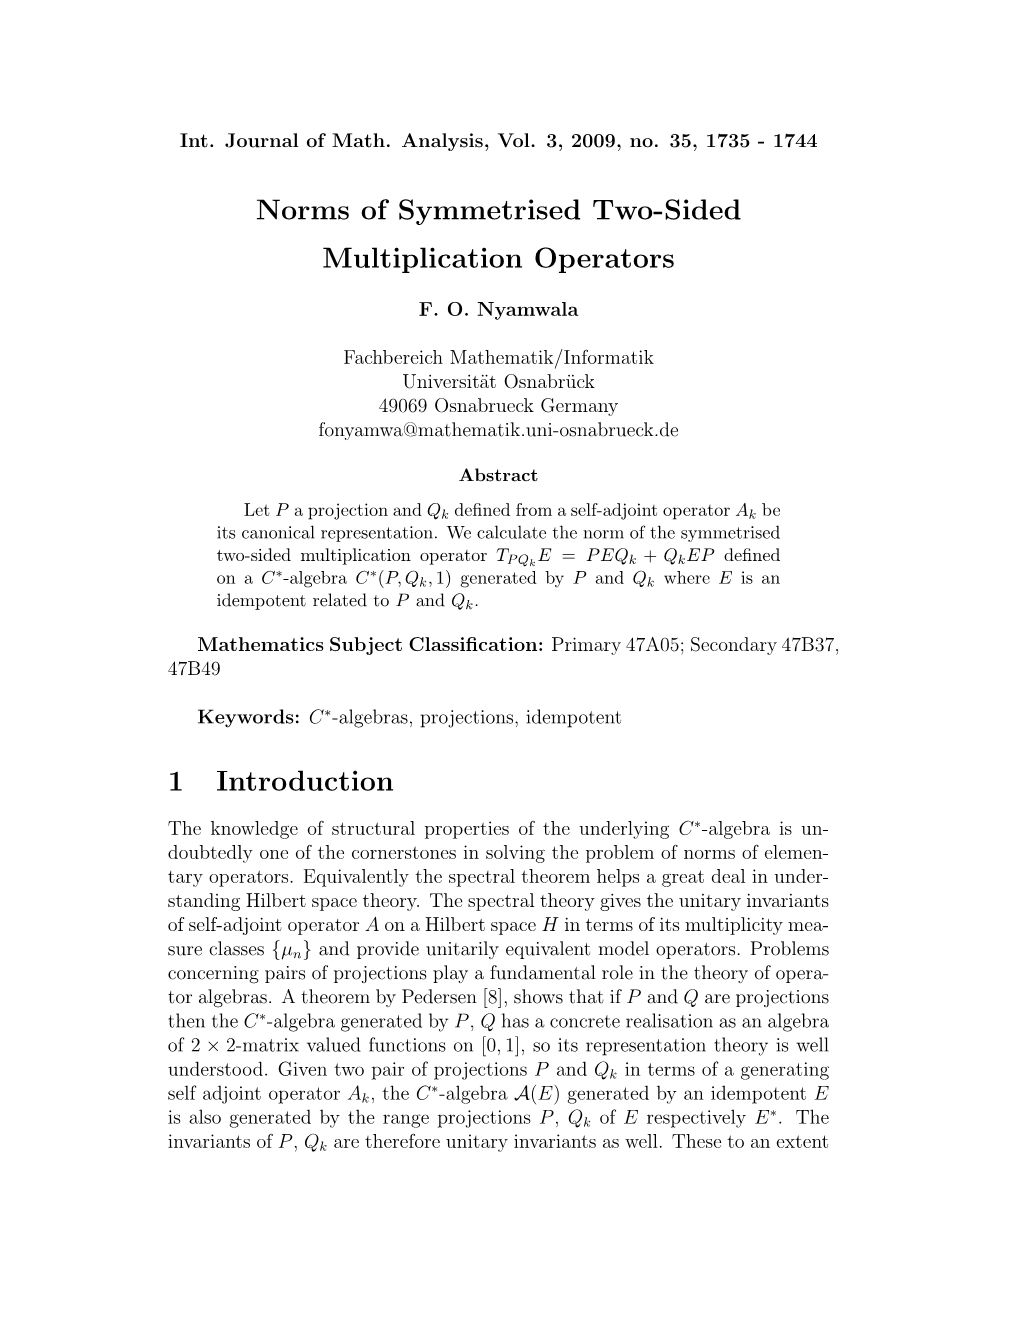 Norms of Symmetrised Two-Sided Multiplication Operators 1 Introduction